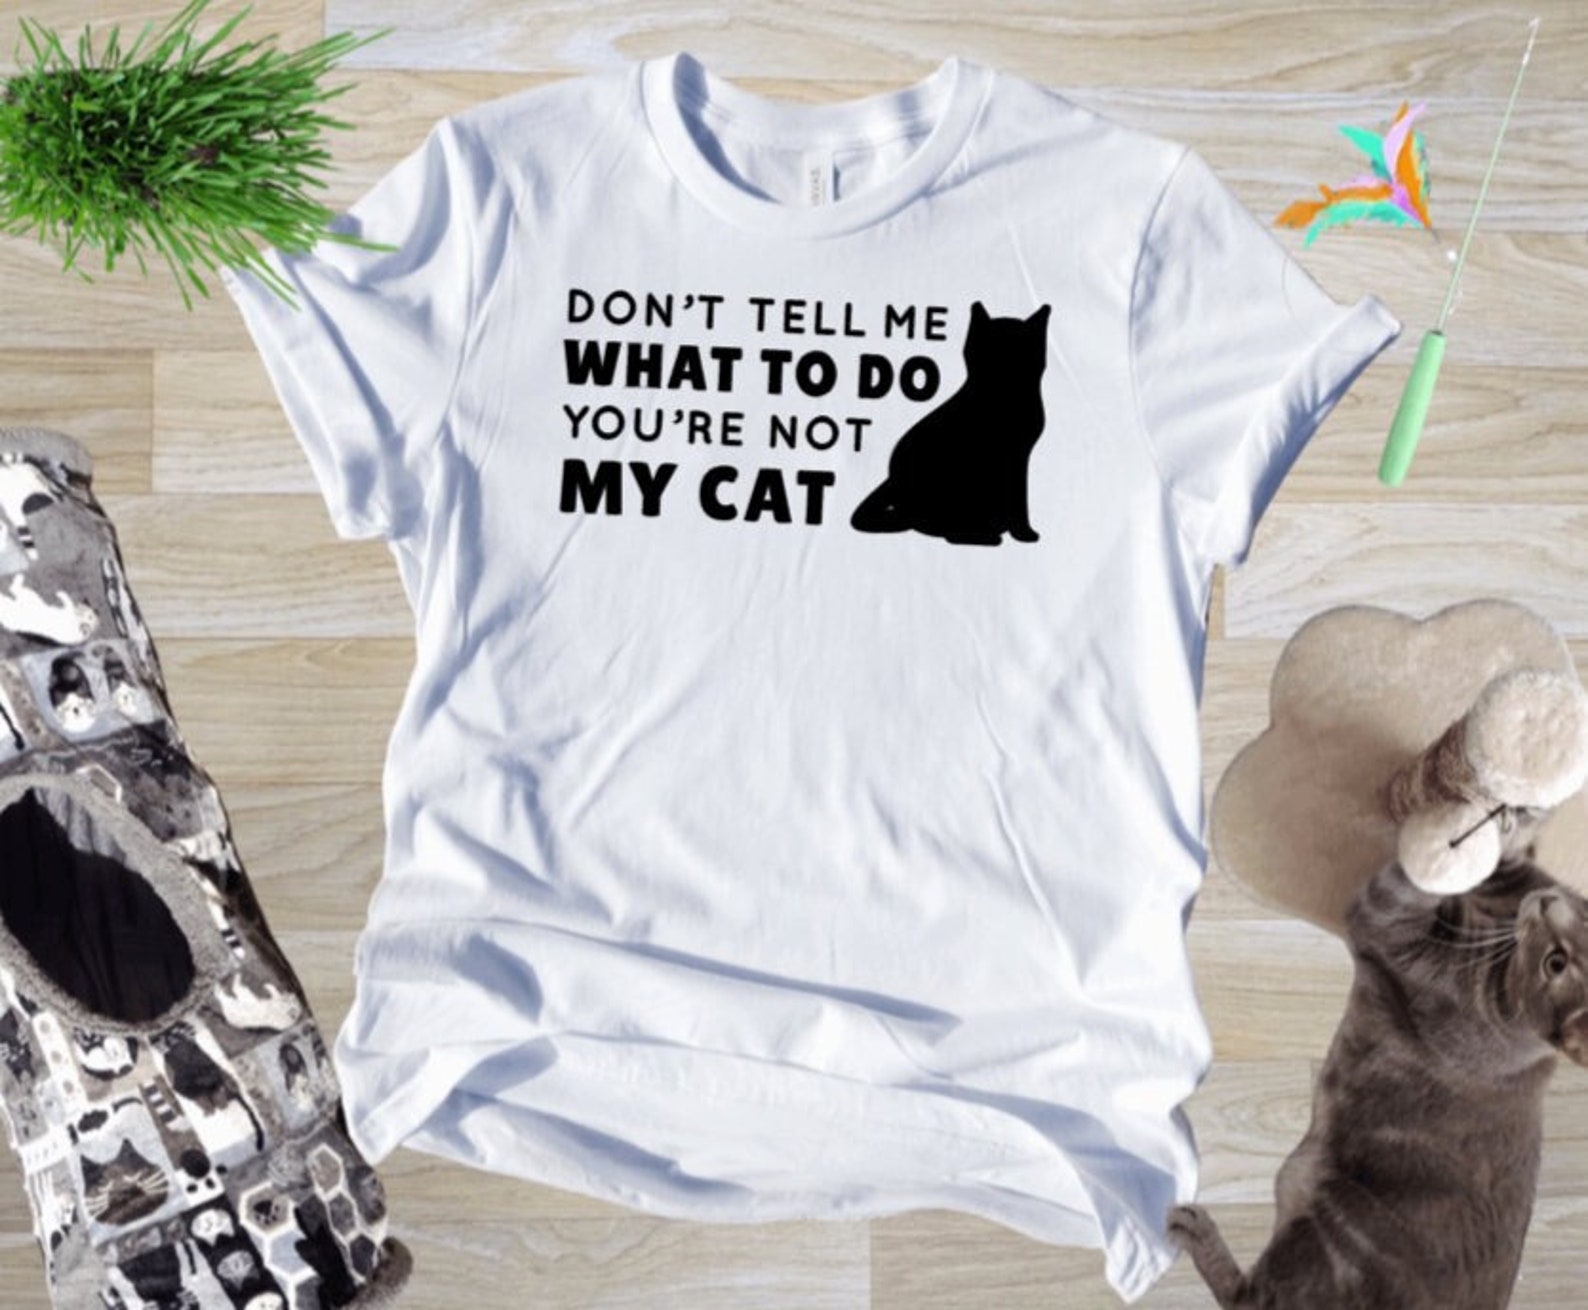 Don't Tell Me What to Do You're Not My Cat Adult Shirt | Etsy